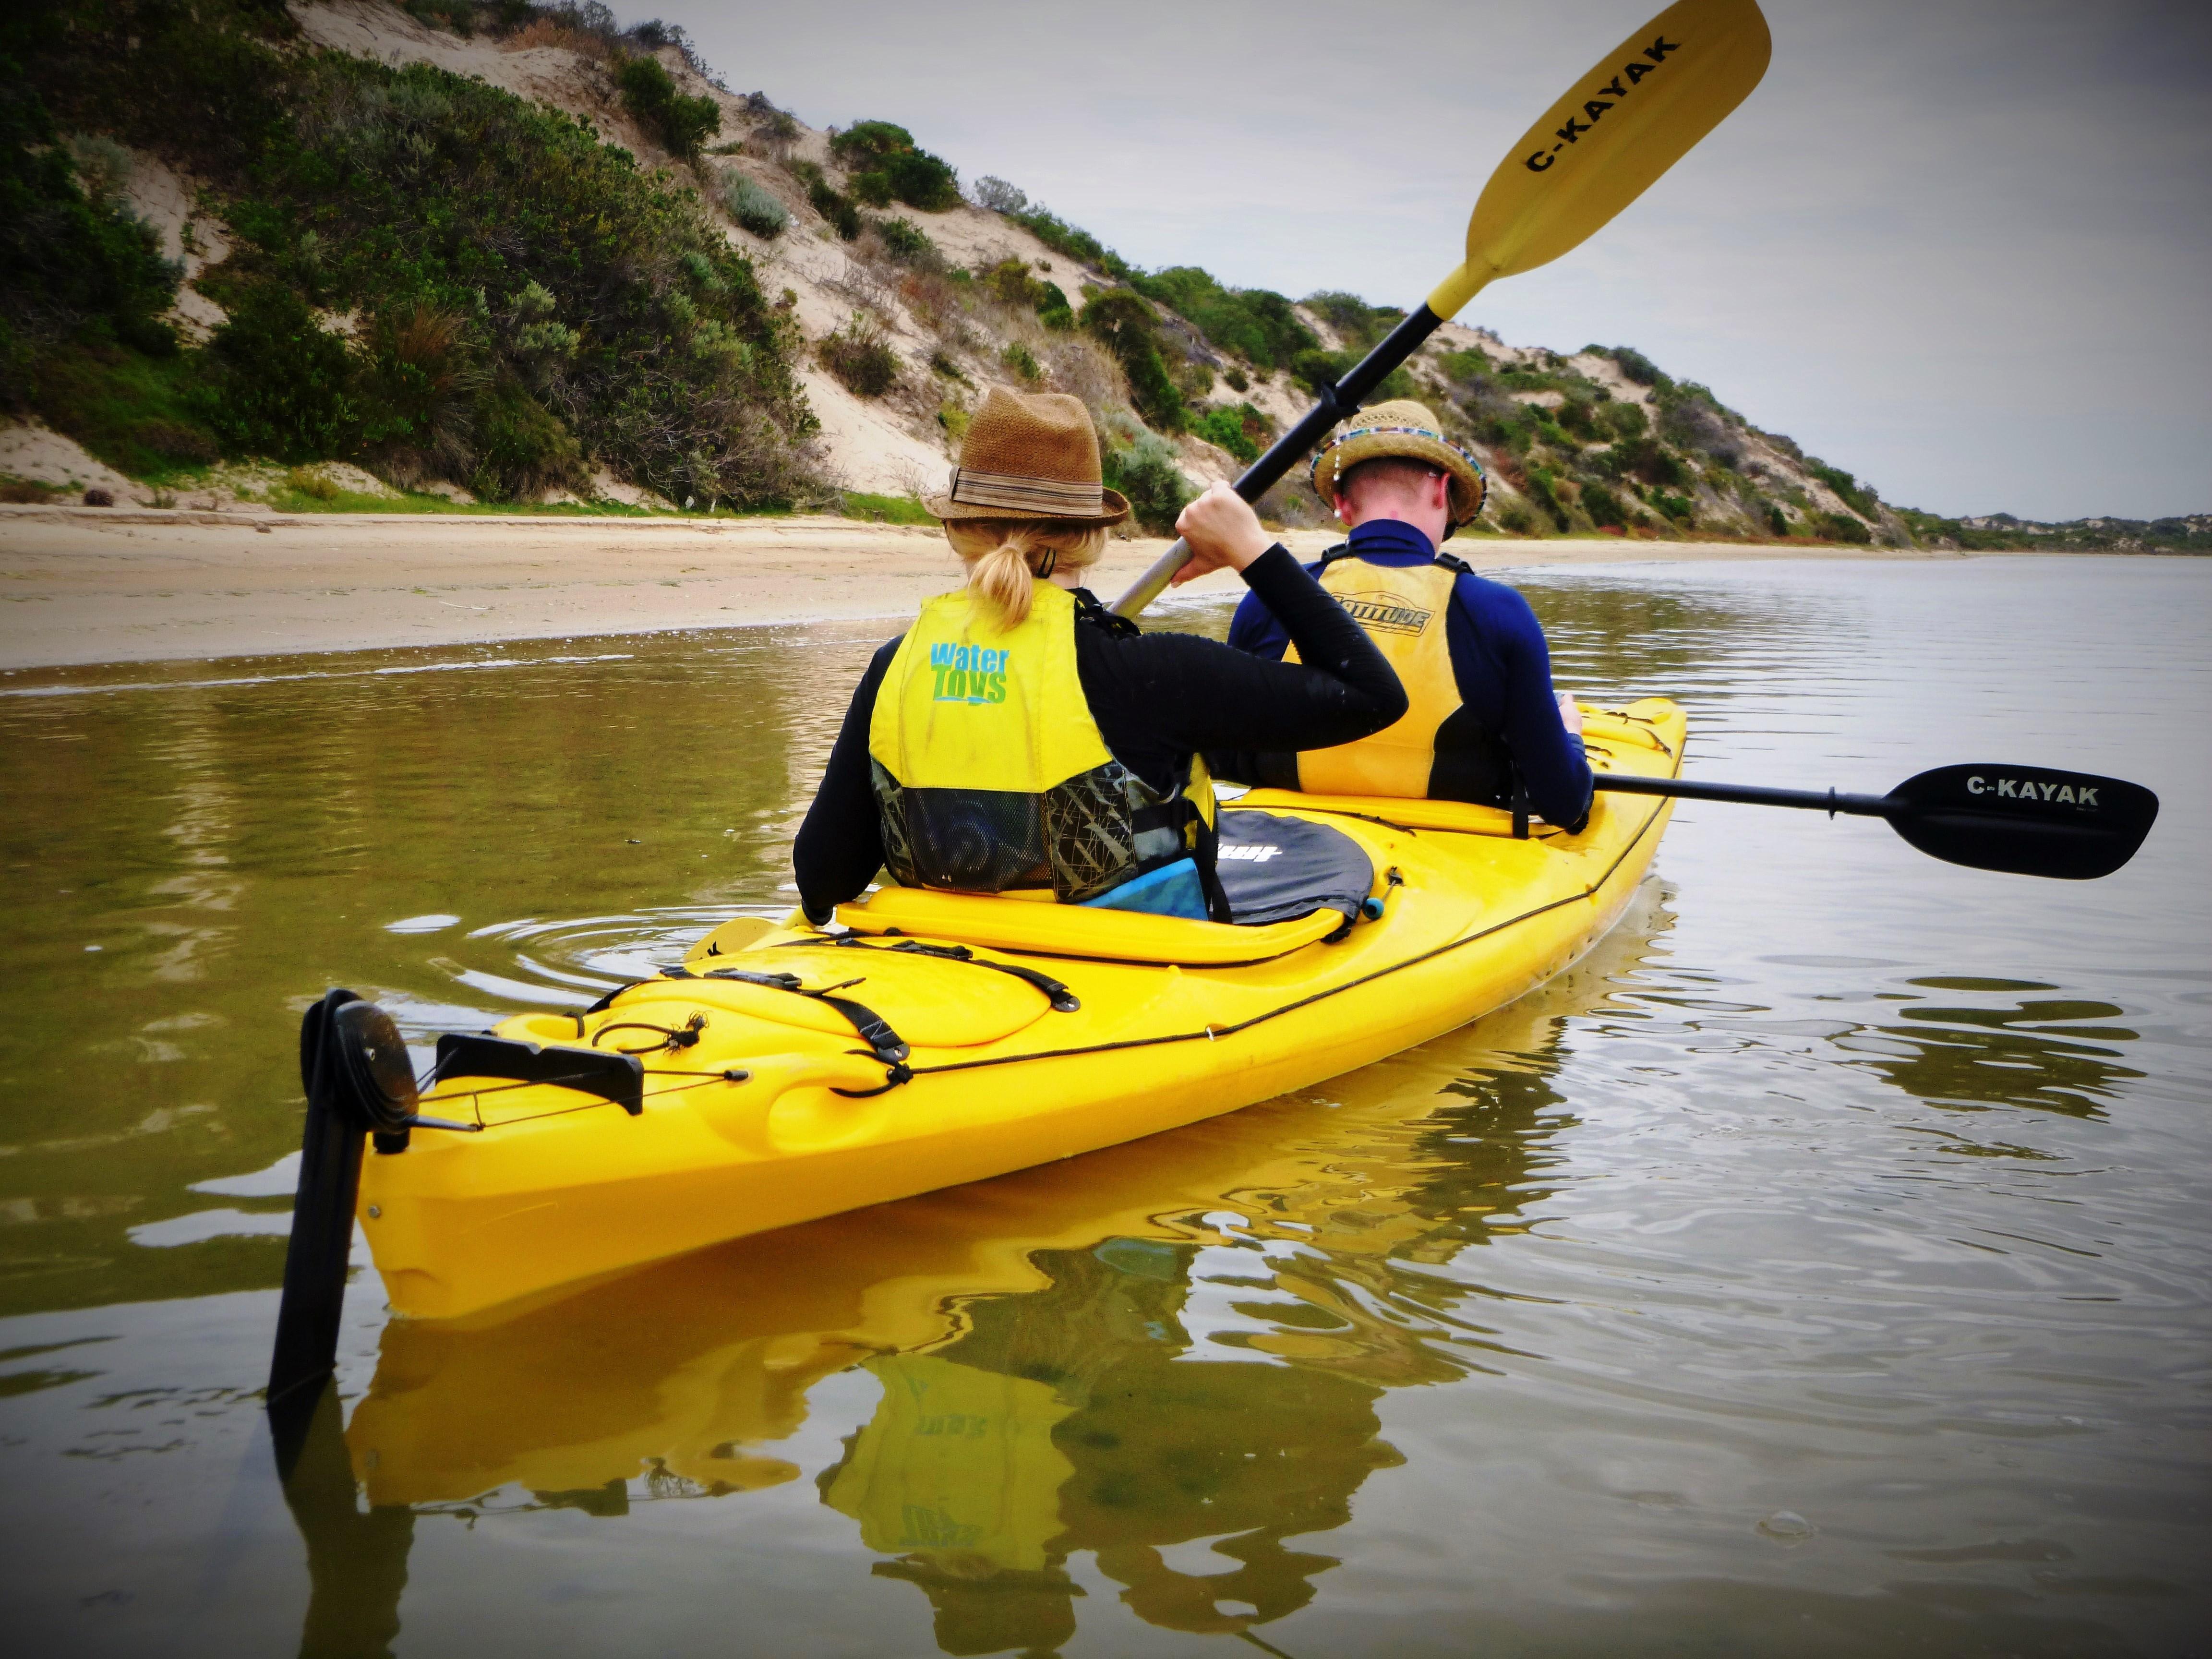 Full Day Guided Coorong Kayaking Tour - Adelaide - For 2